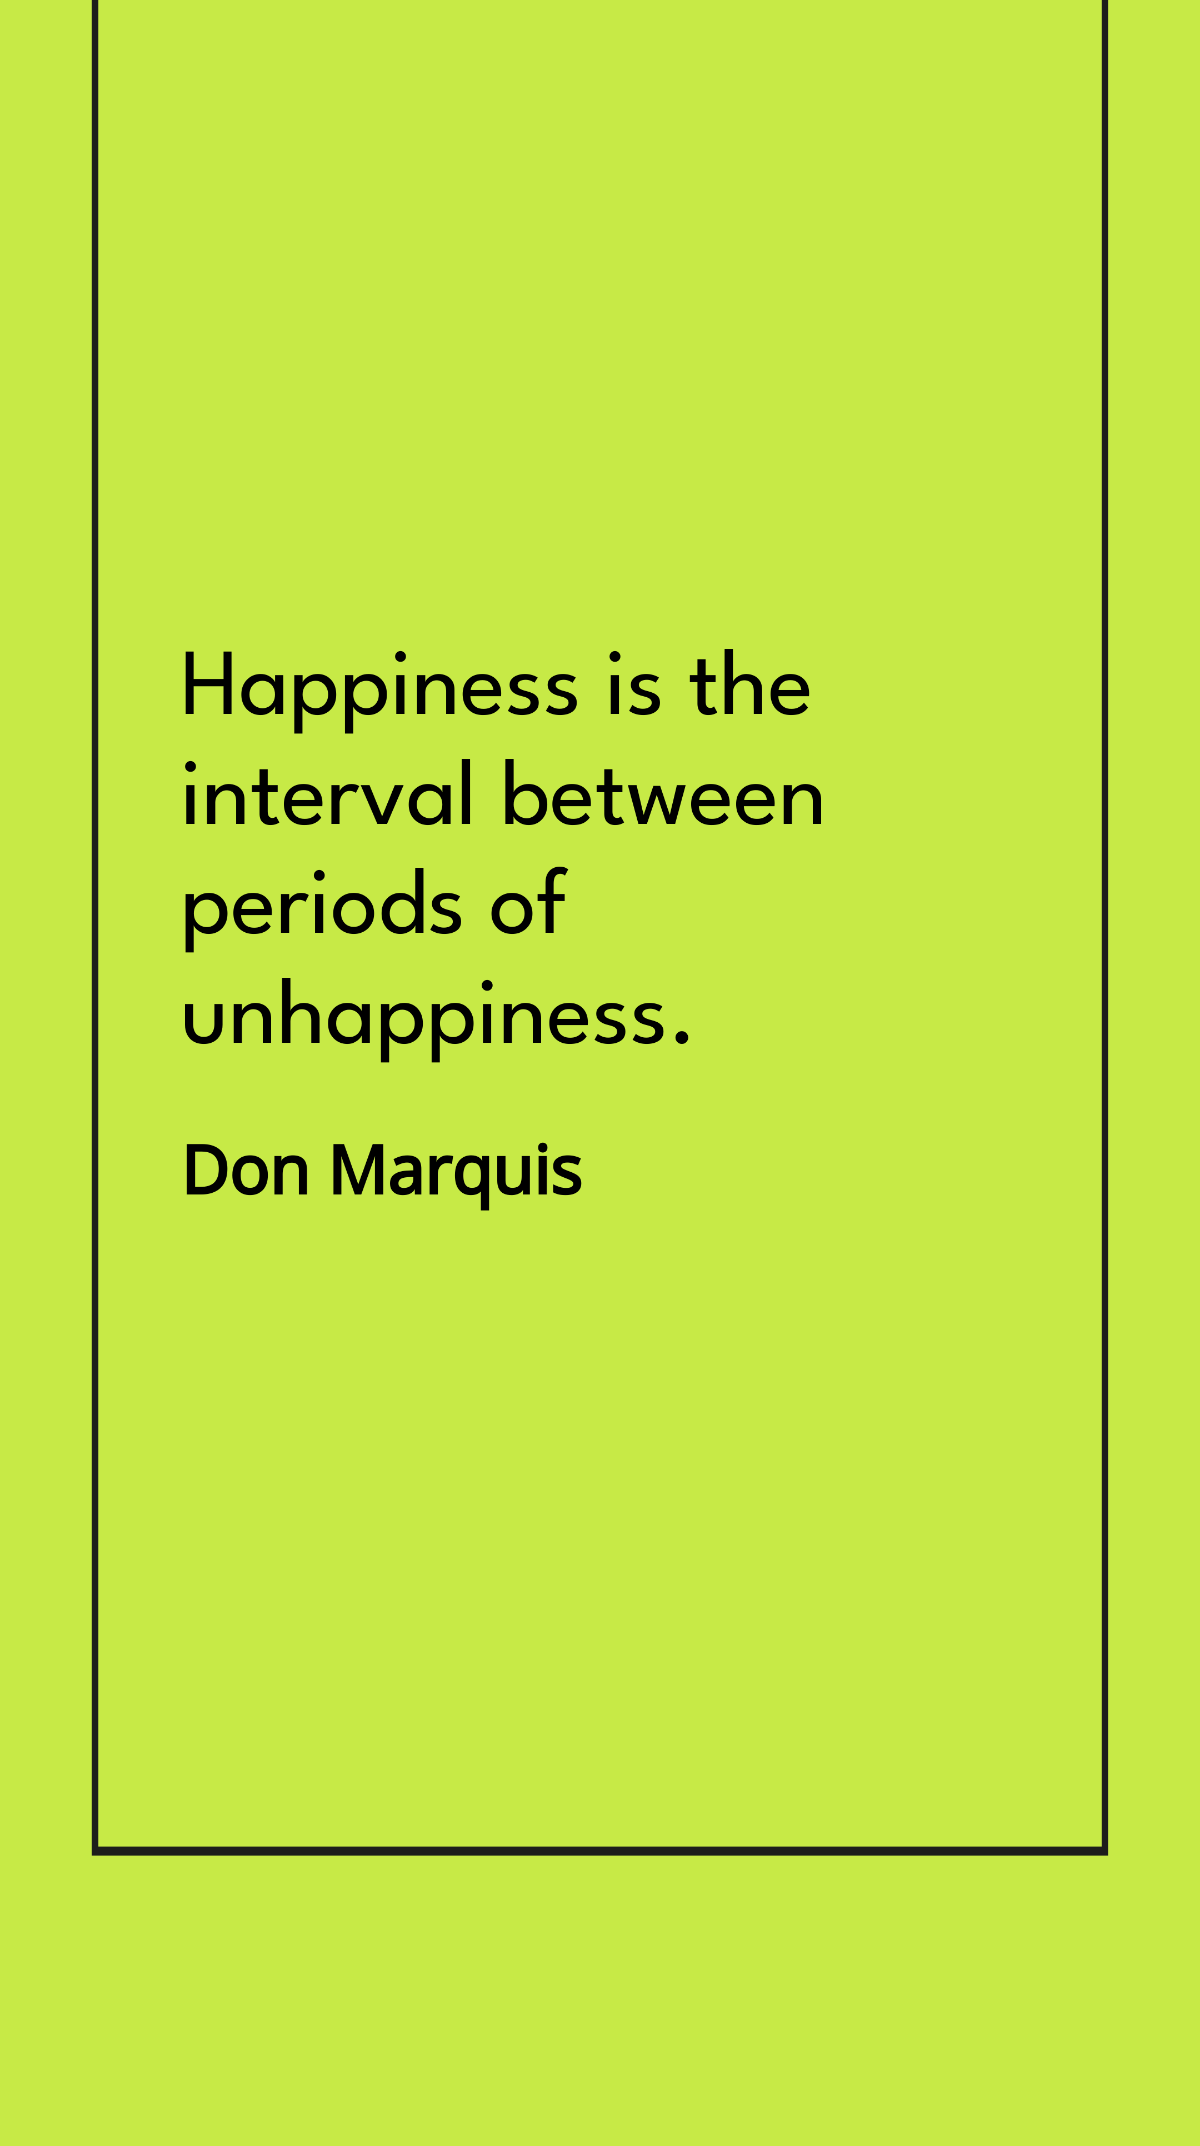 Don Marquis - Happiness is the interval between periods of unhappiness. Template